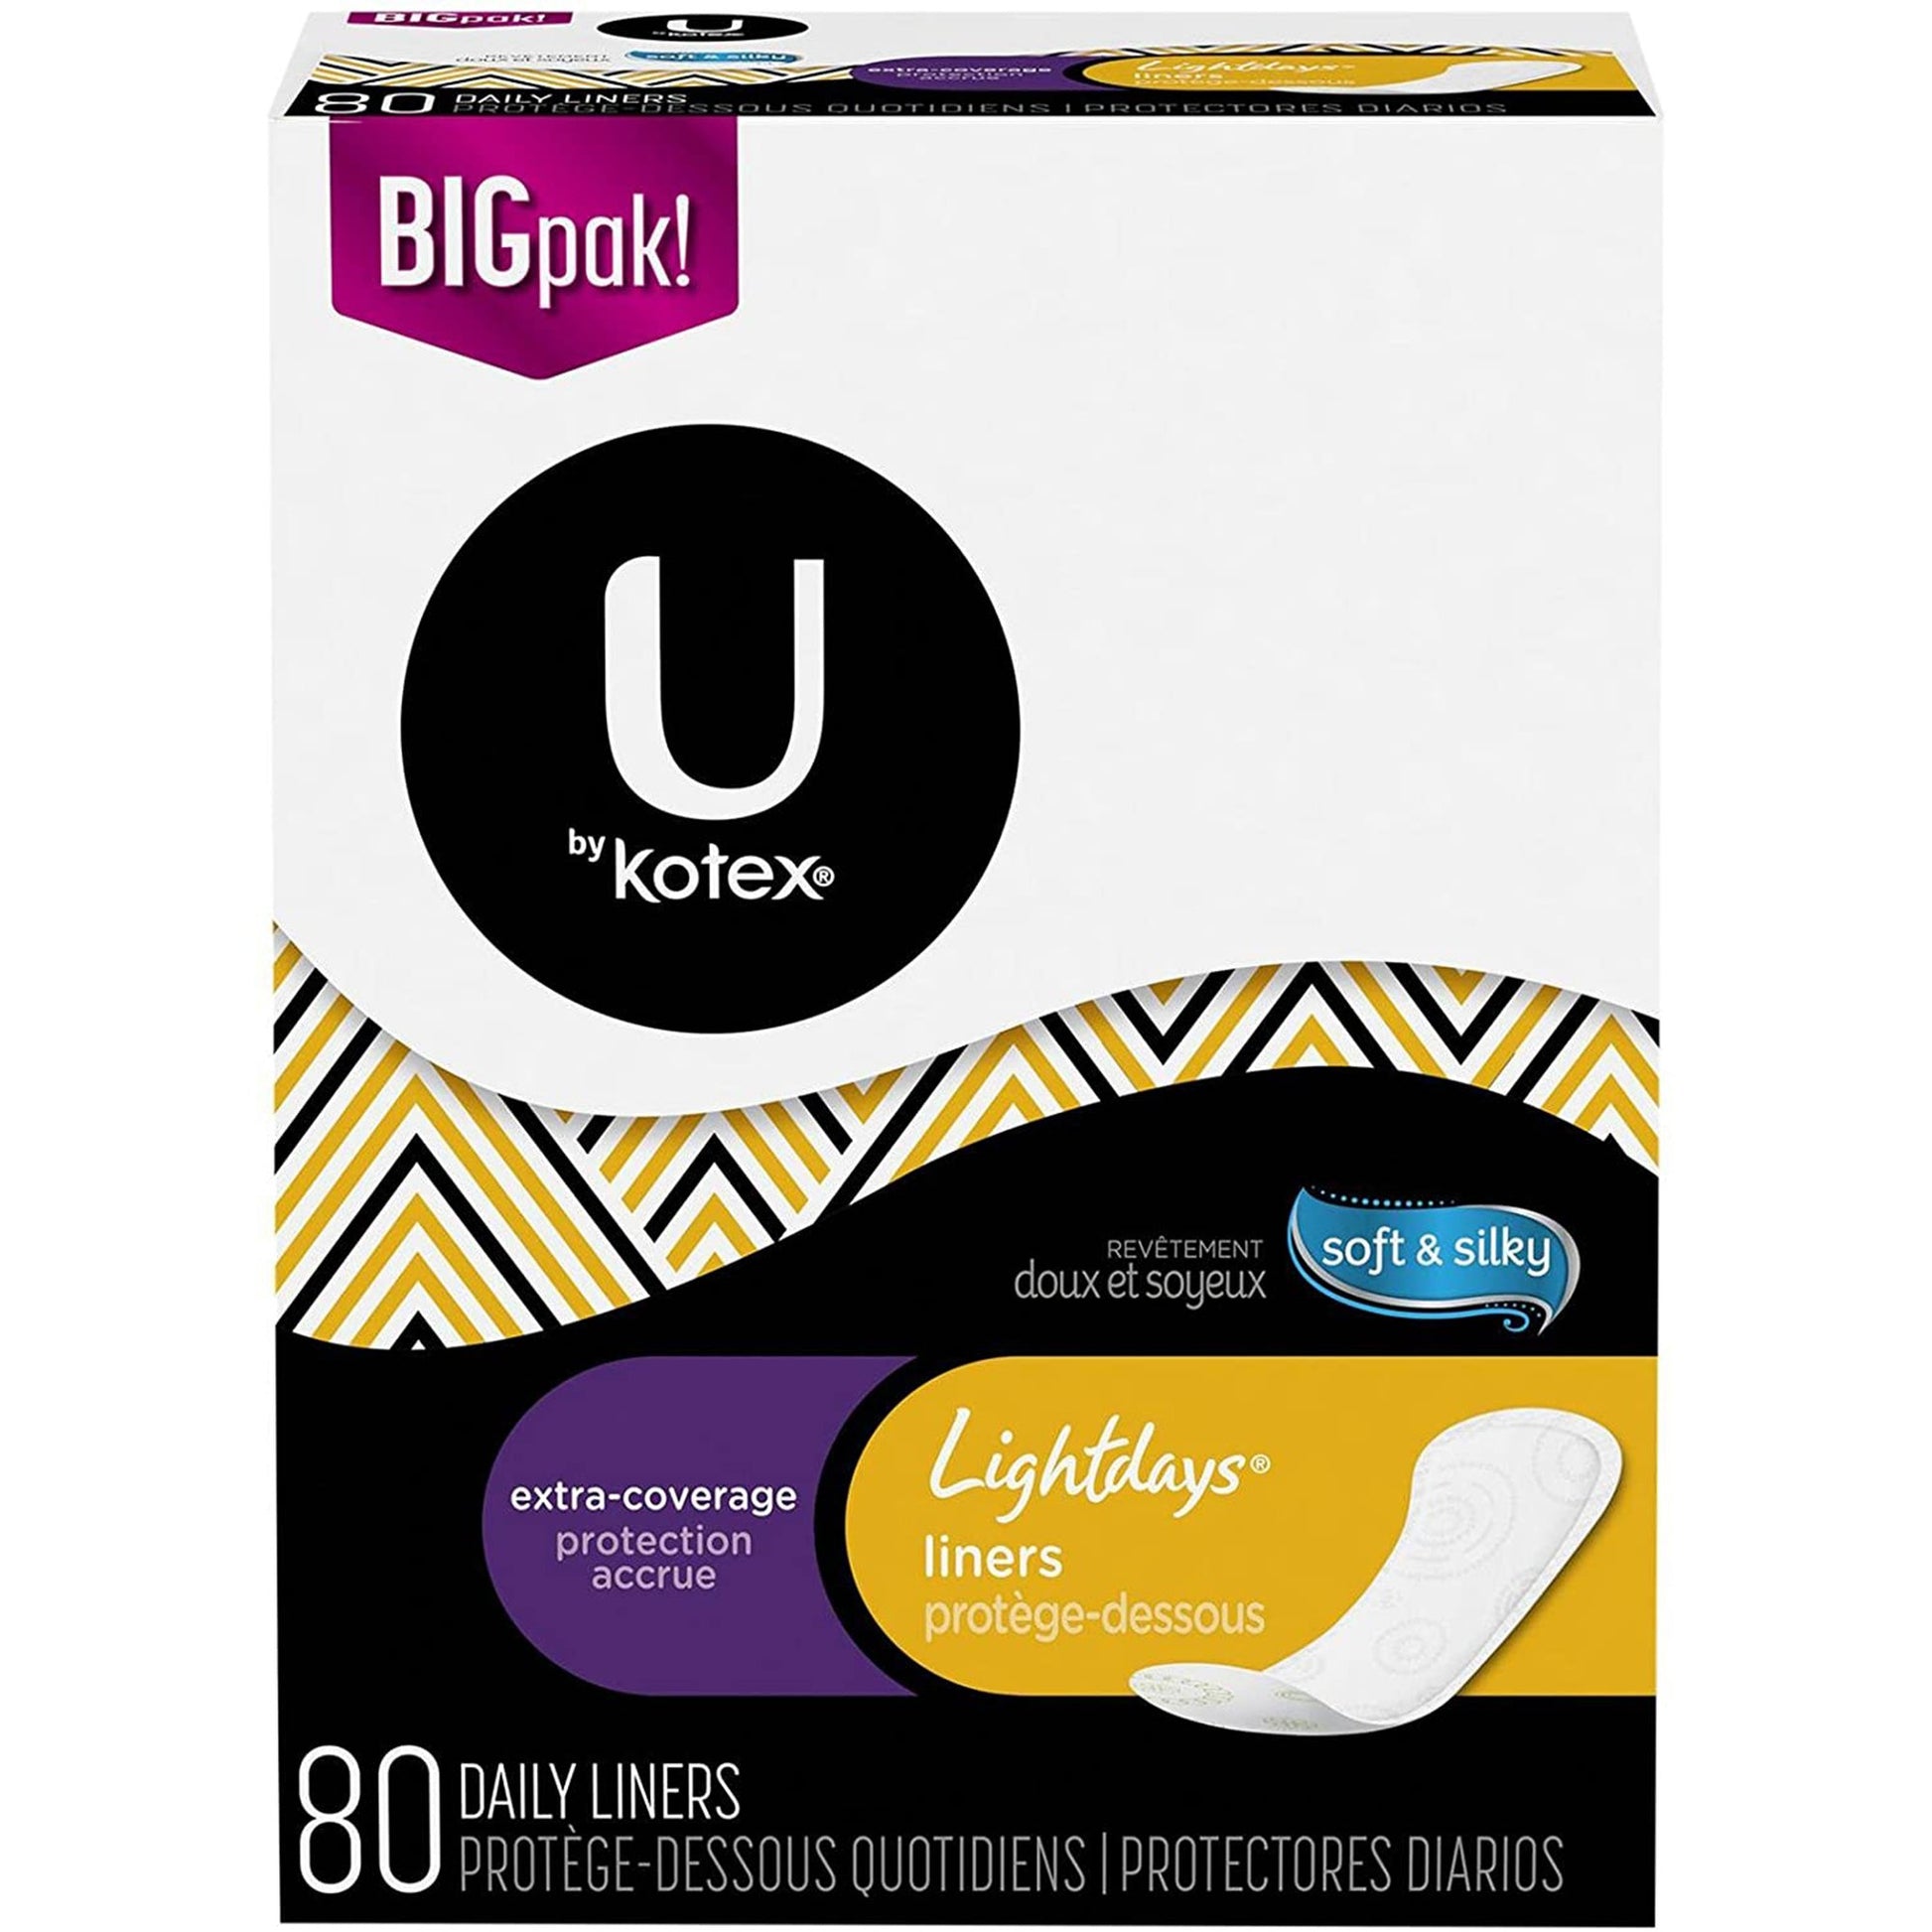 FSA-approved U by Kotex Security Lightdays Liners, Extra-Coverage, 80 ct –  BuyFSA